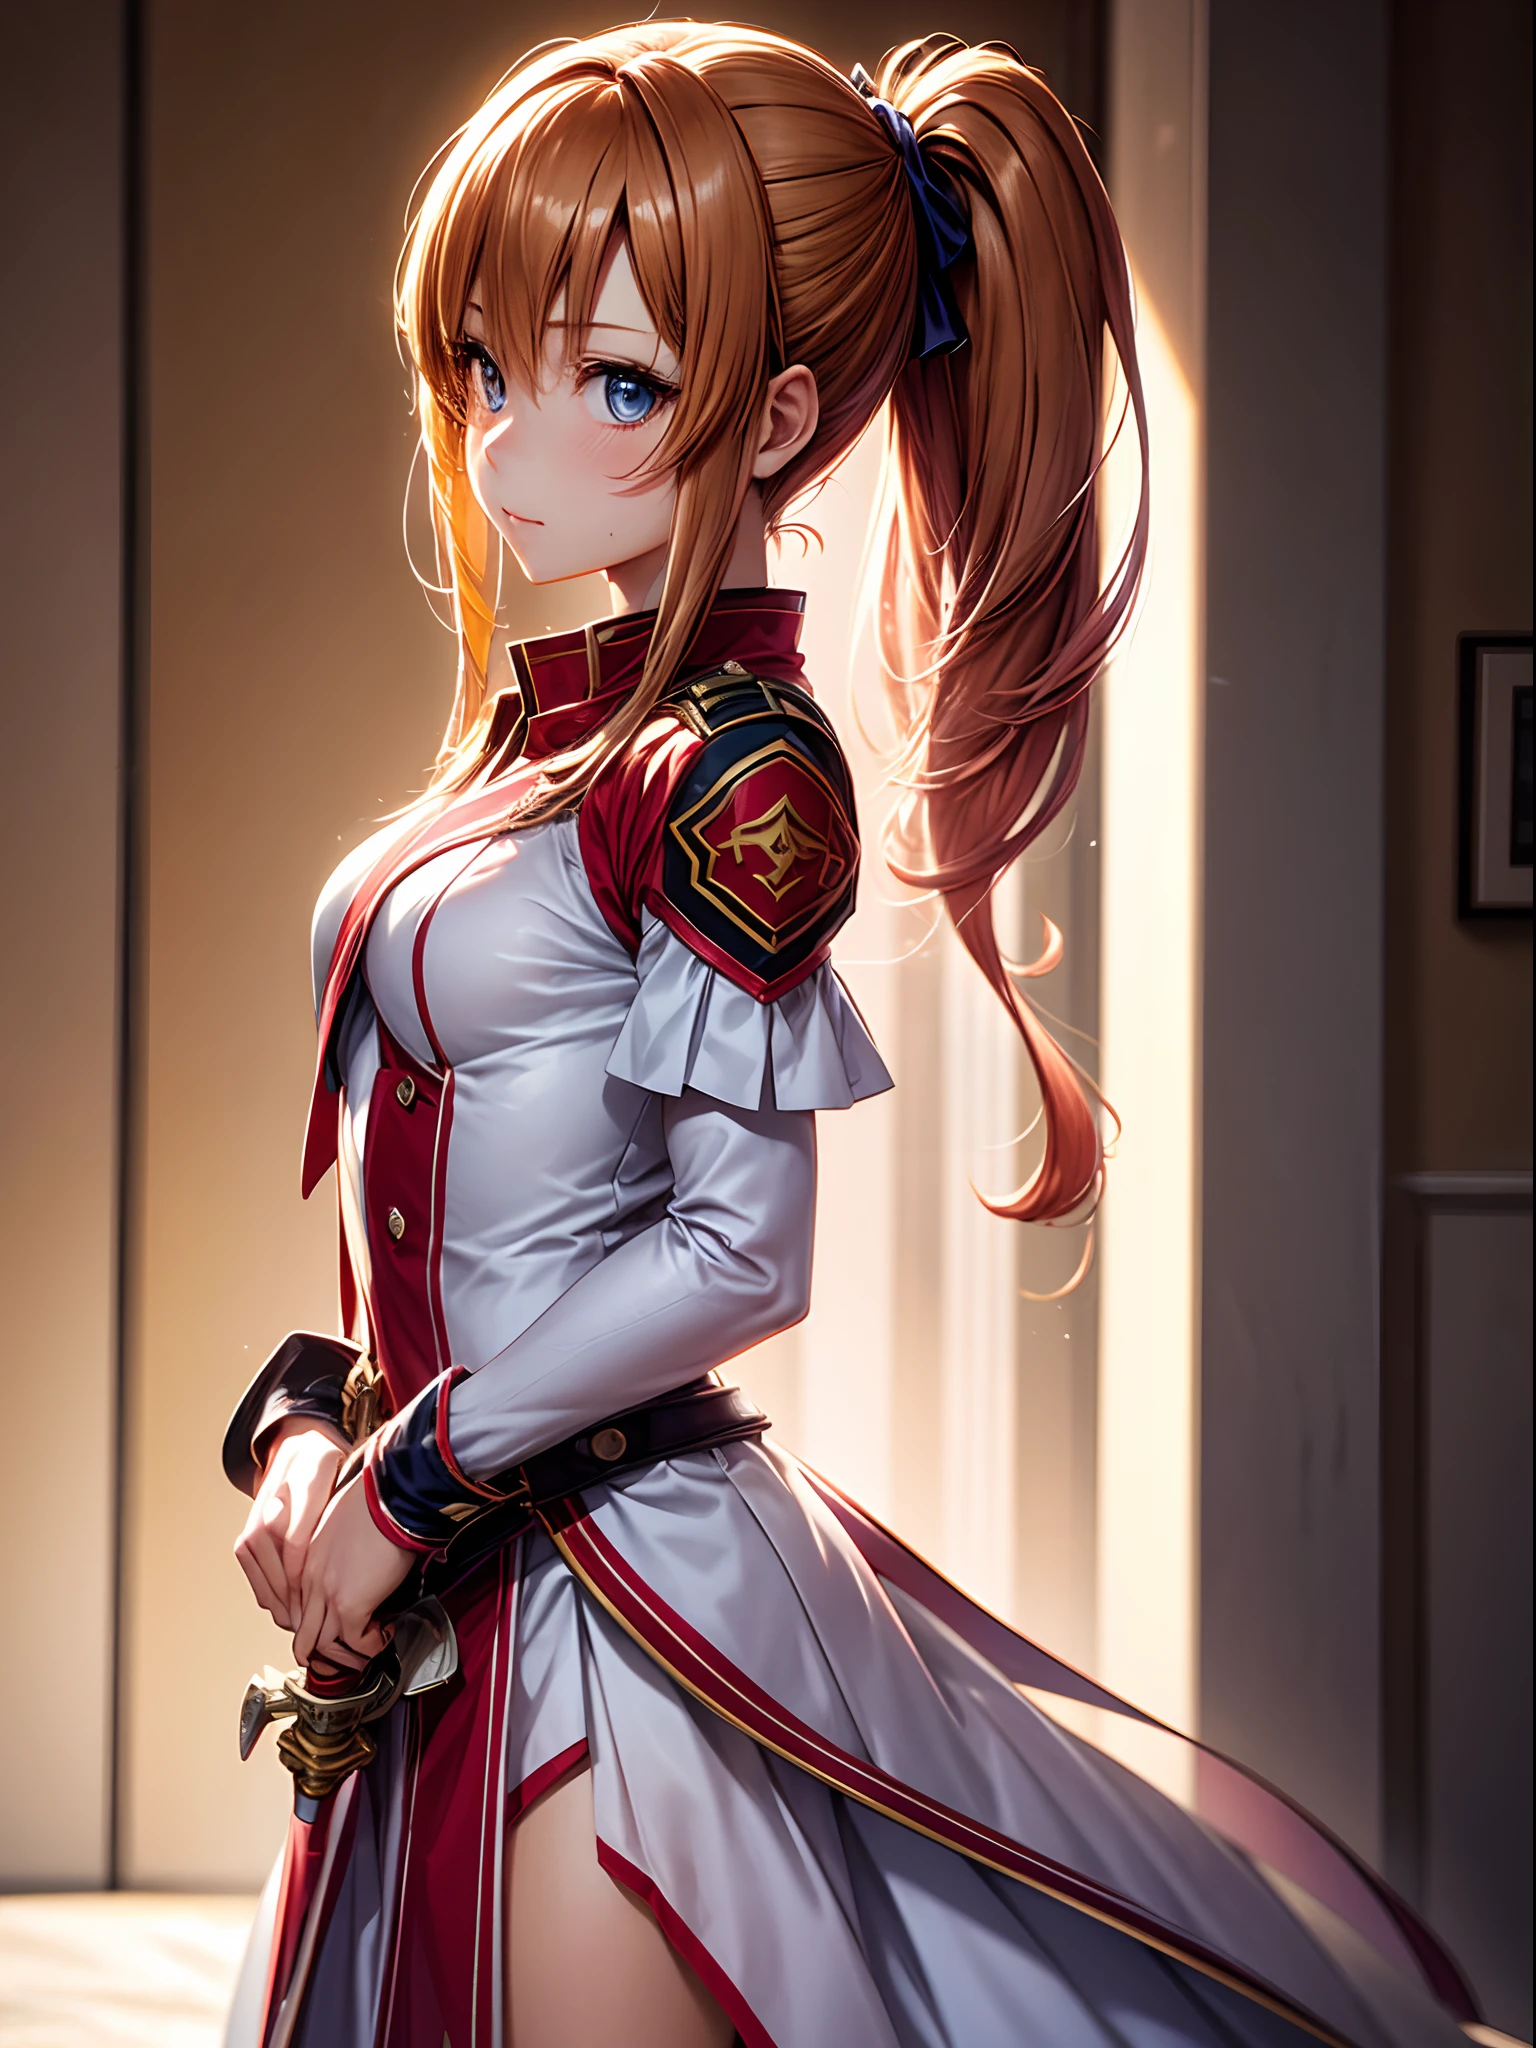 best pictures, masutepiece, ​masterpiece、super precision、sword in hands、thrust、[[rapier:1.10]]、High quality anime girl with brown hair and brown eyes、[3D images:1.25],[[Attractive eyes,A detailed eye、radiant eyes, Colorful eyes:1.25]]、the whole、front-facing view、Short ponytail, Pink hair、Solo Girl,red and white uniform, 8k picture、Dress correctly、best pictures, masutepiece, Photorealistic, Soft light, Attractive eyes that make you feel sucked in、Cowboy Shot、Kawaii Girl